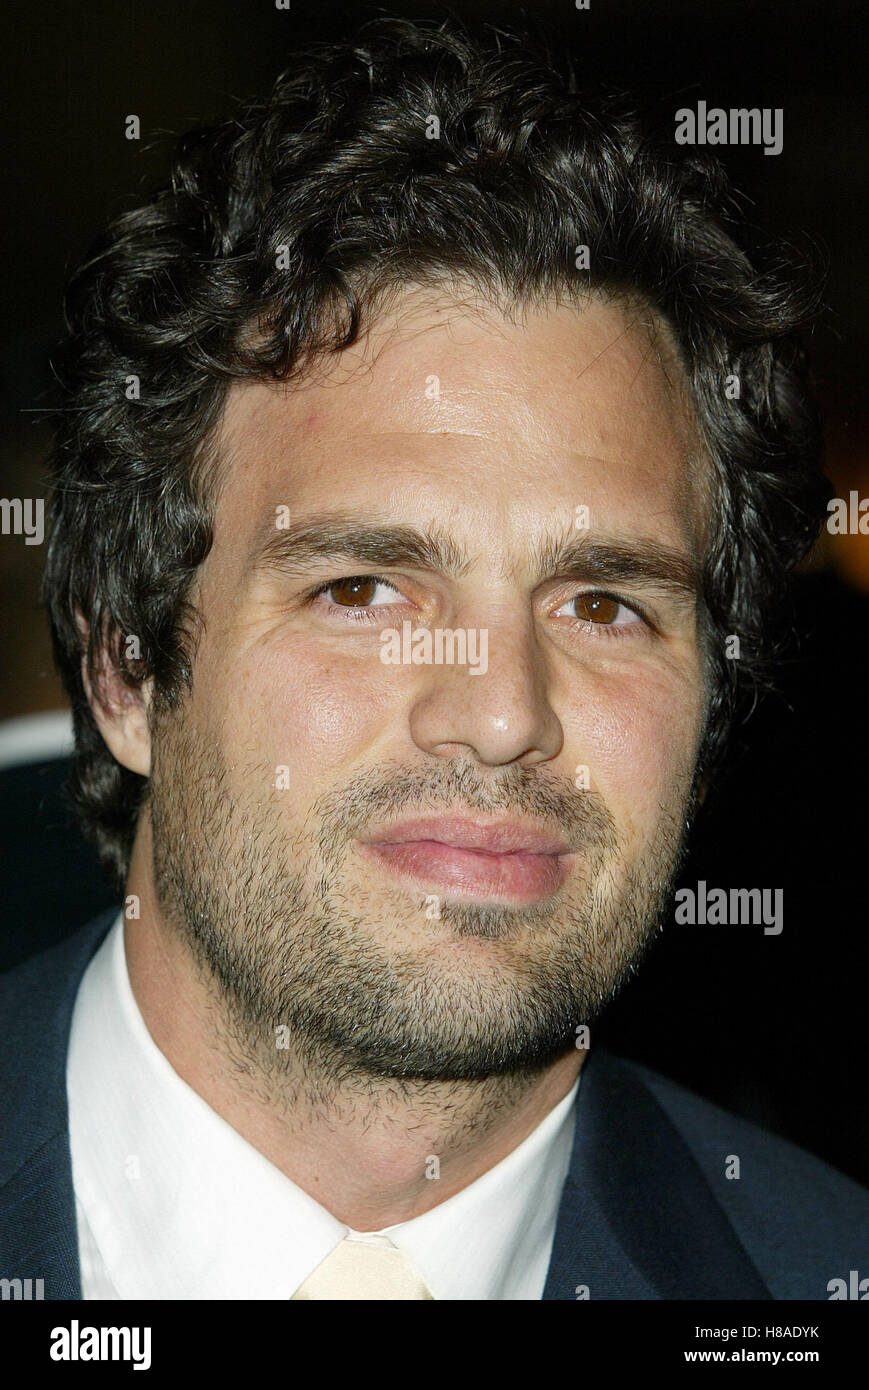 MARK RUFFALO IN THE CUT  LA FILM PREMIERE ACADEMY OF MOTION PICTURES BEVERLY HILLS LA USA 16 October 2003 Stock Photo